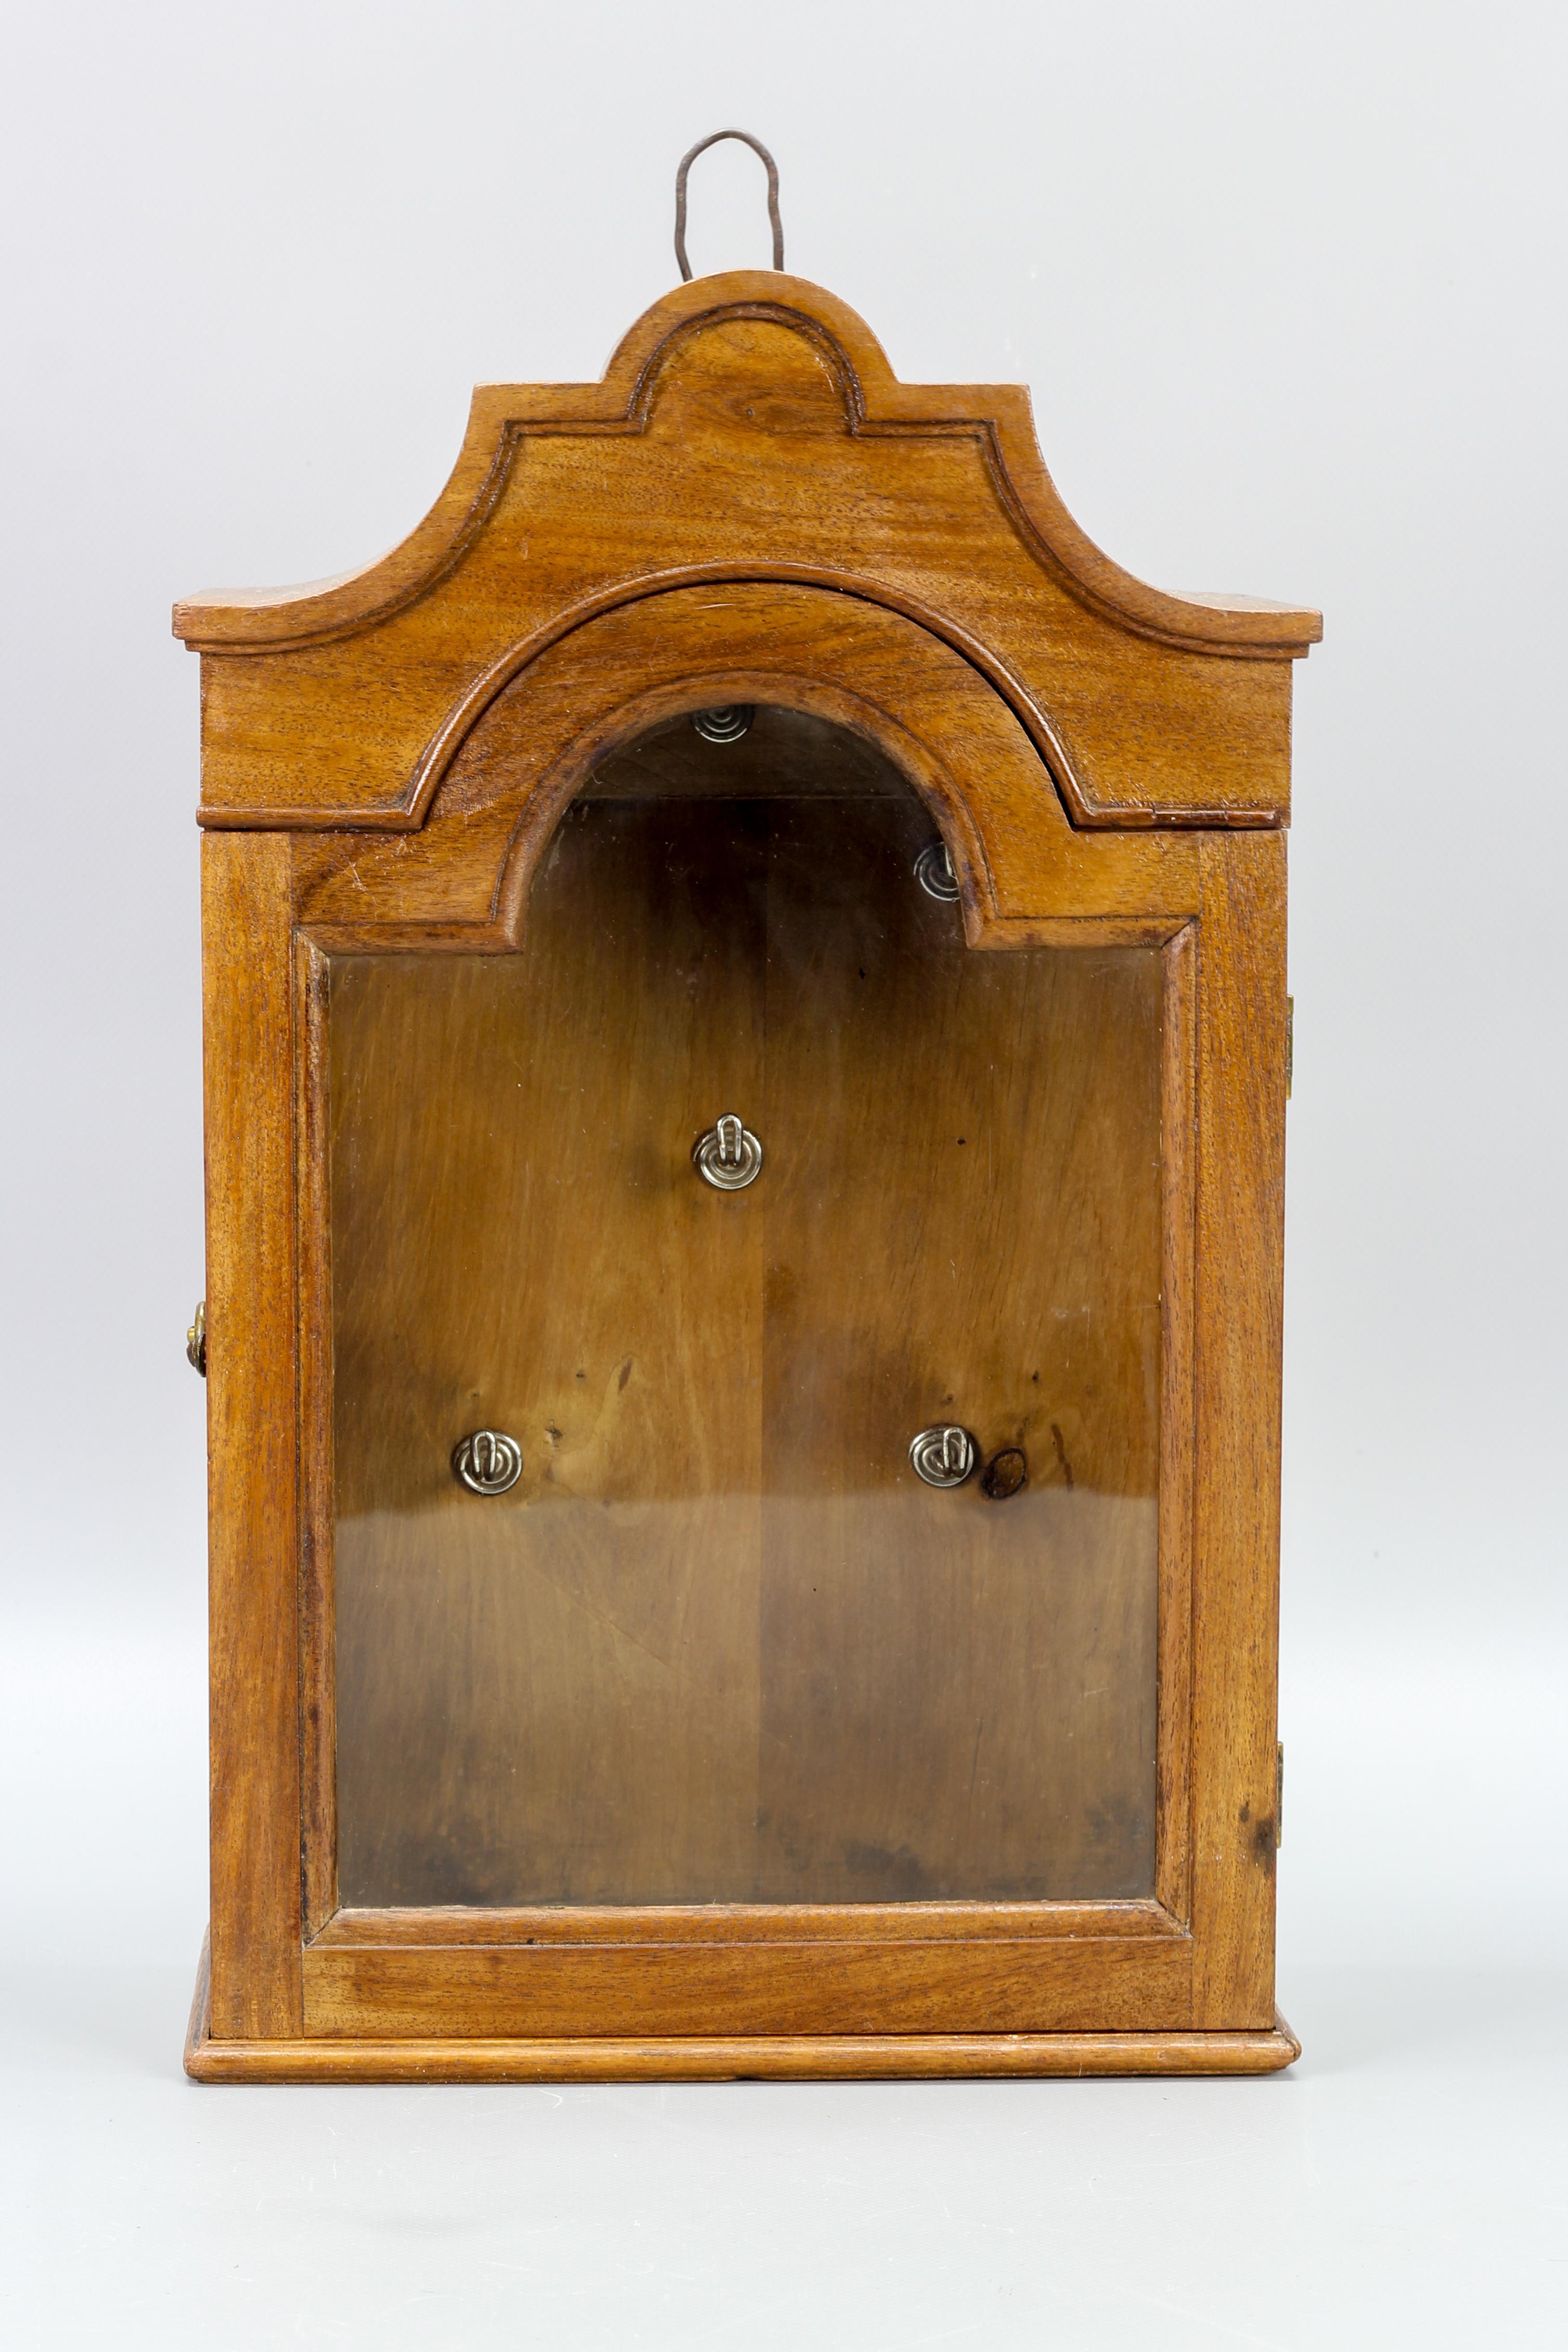 Antique walnut and glass wall hanging key cabinet, ca 1890.
Lovely walnut wall hanging key cabinet with one glazed door opening to reveal six metal hooks for key storage.
Dimensions: height: 38 cm / 14.96 in; width: 24 cm / 9.44 in; depth: 13 cm /